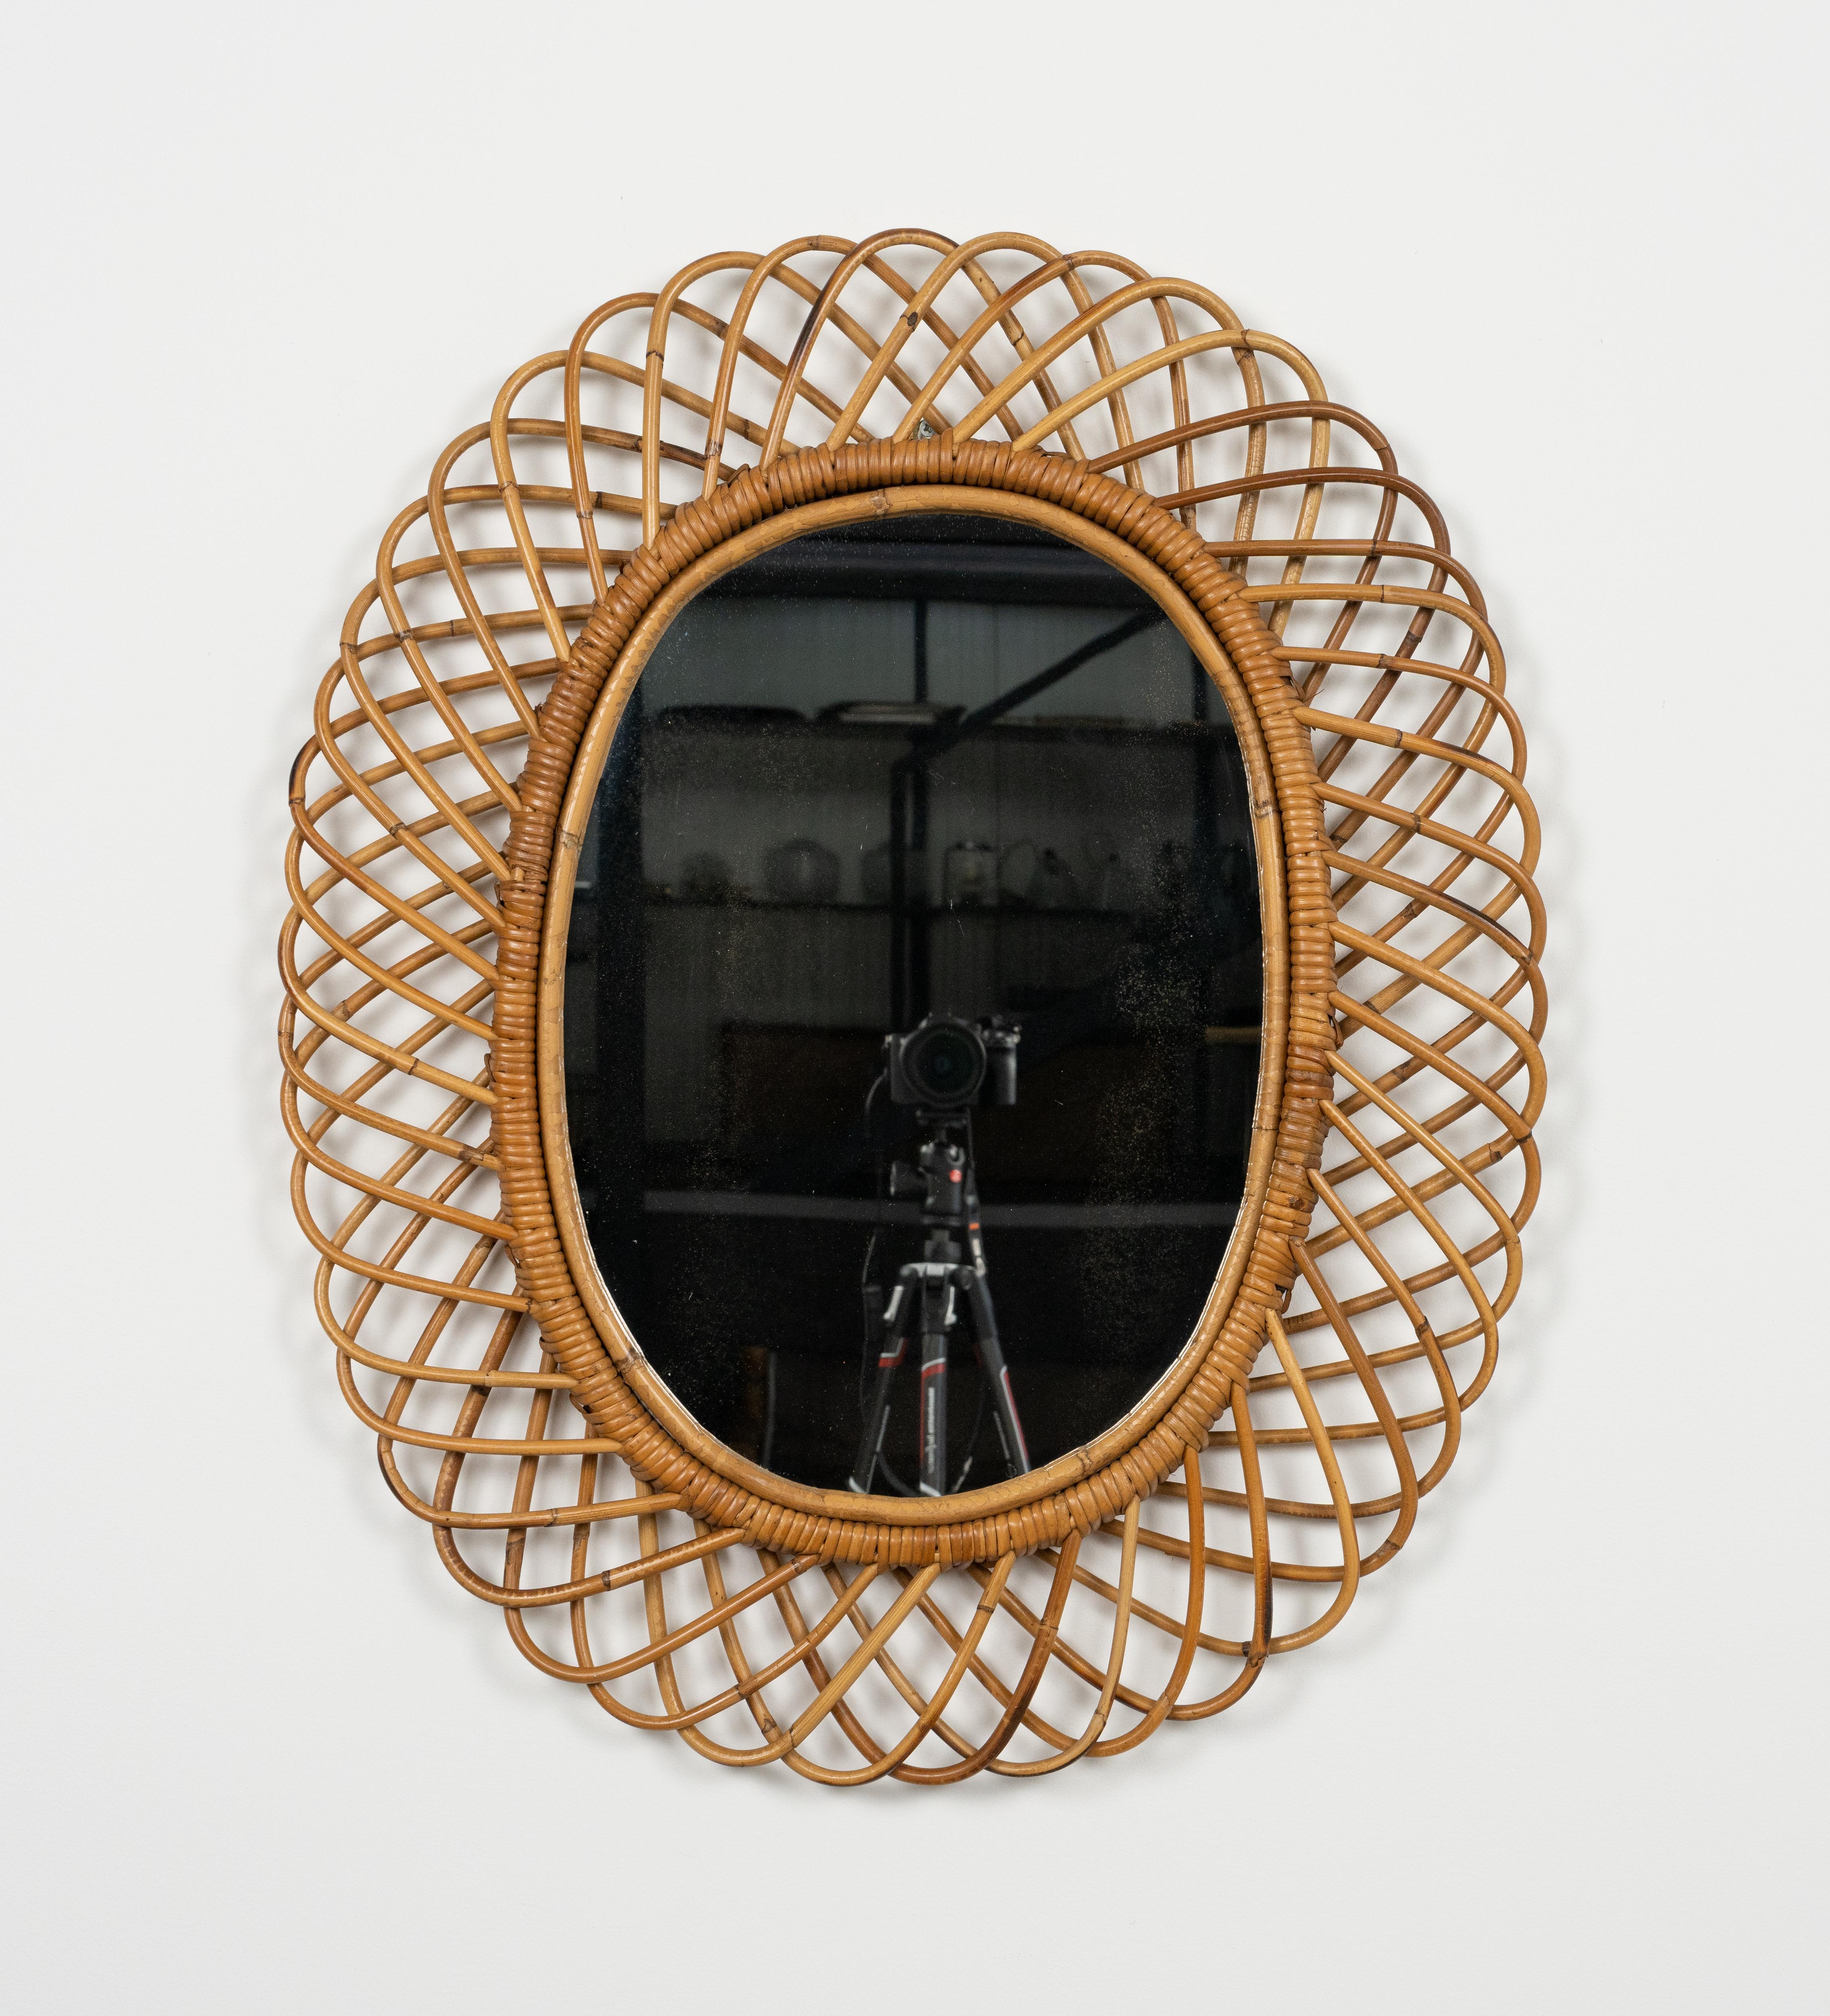 Italian Midcentury Rattan and Bamboo Oval Wall Mirror by Franco Albini, Italy 1960s For Sale